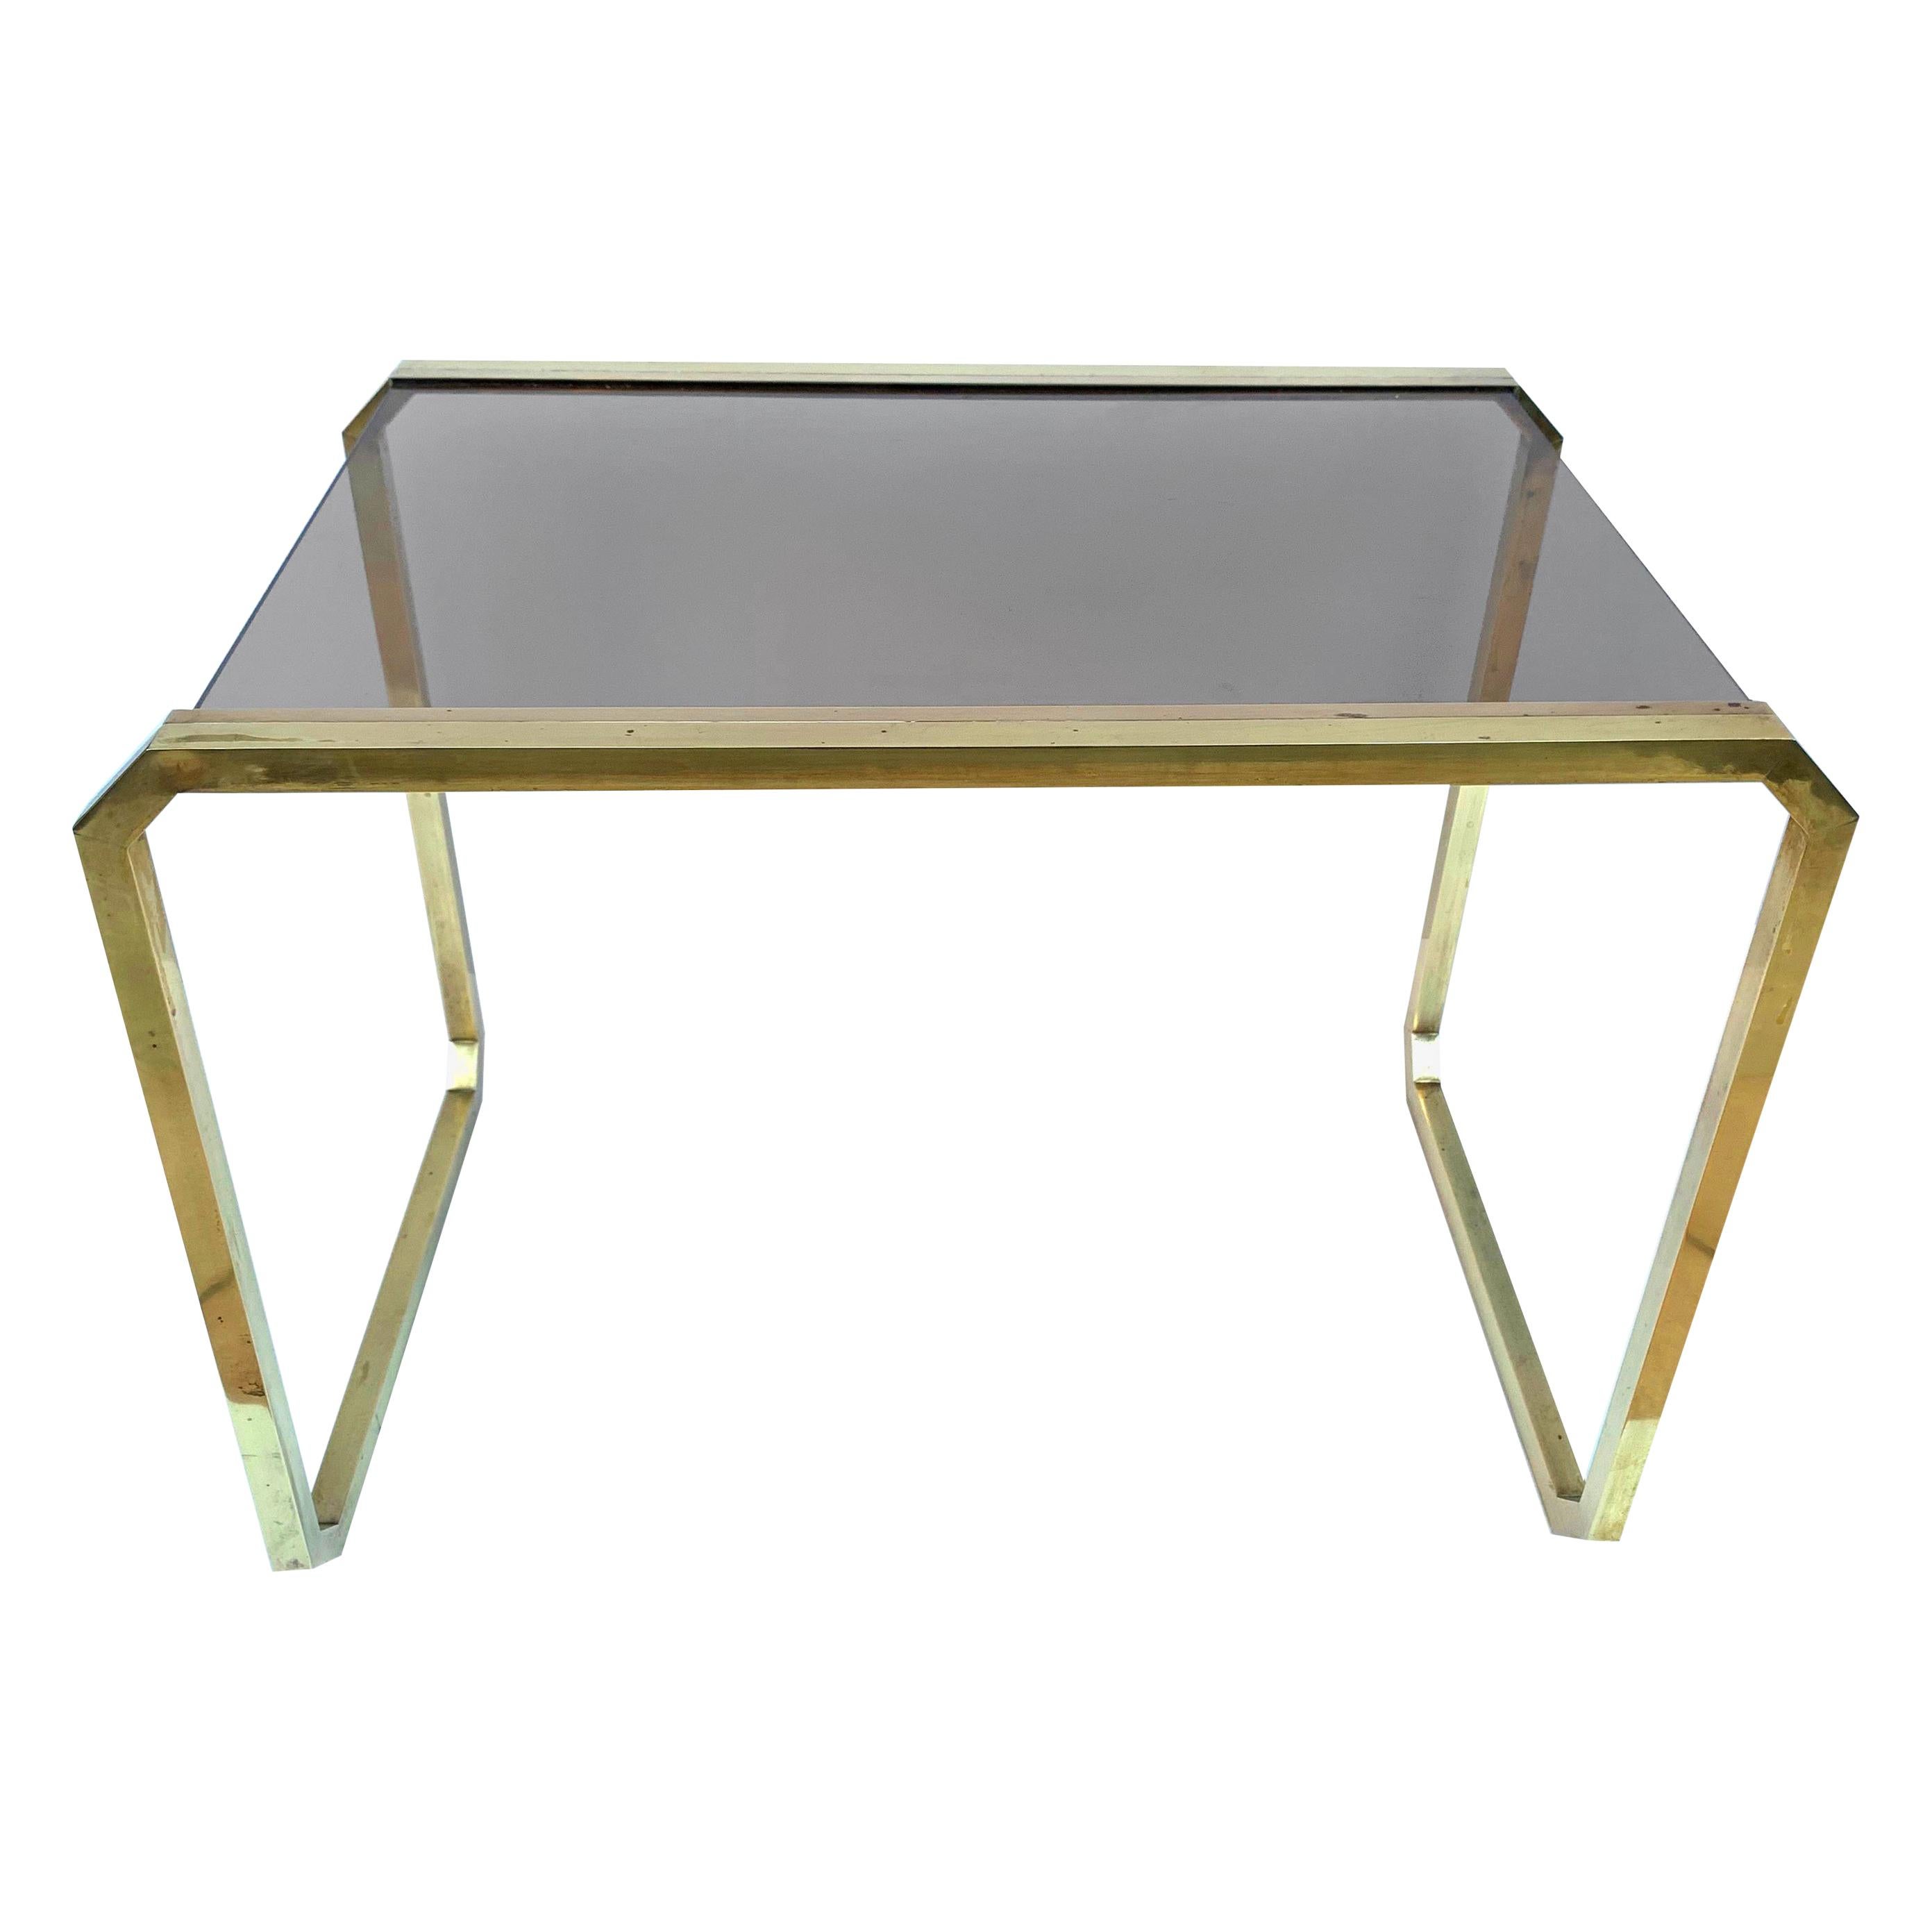 Romeo Rega style Coffee Table in Brass and Smoked Glass, Italy, 1970s Midcentury